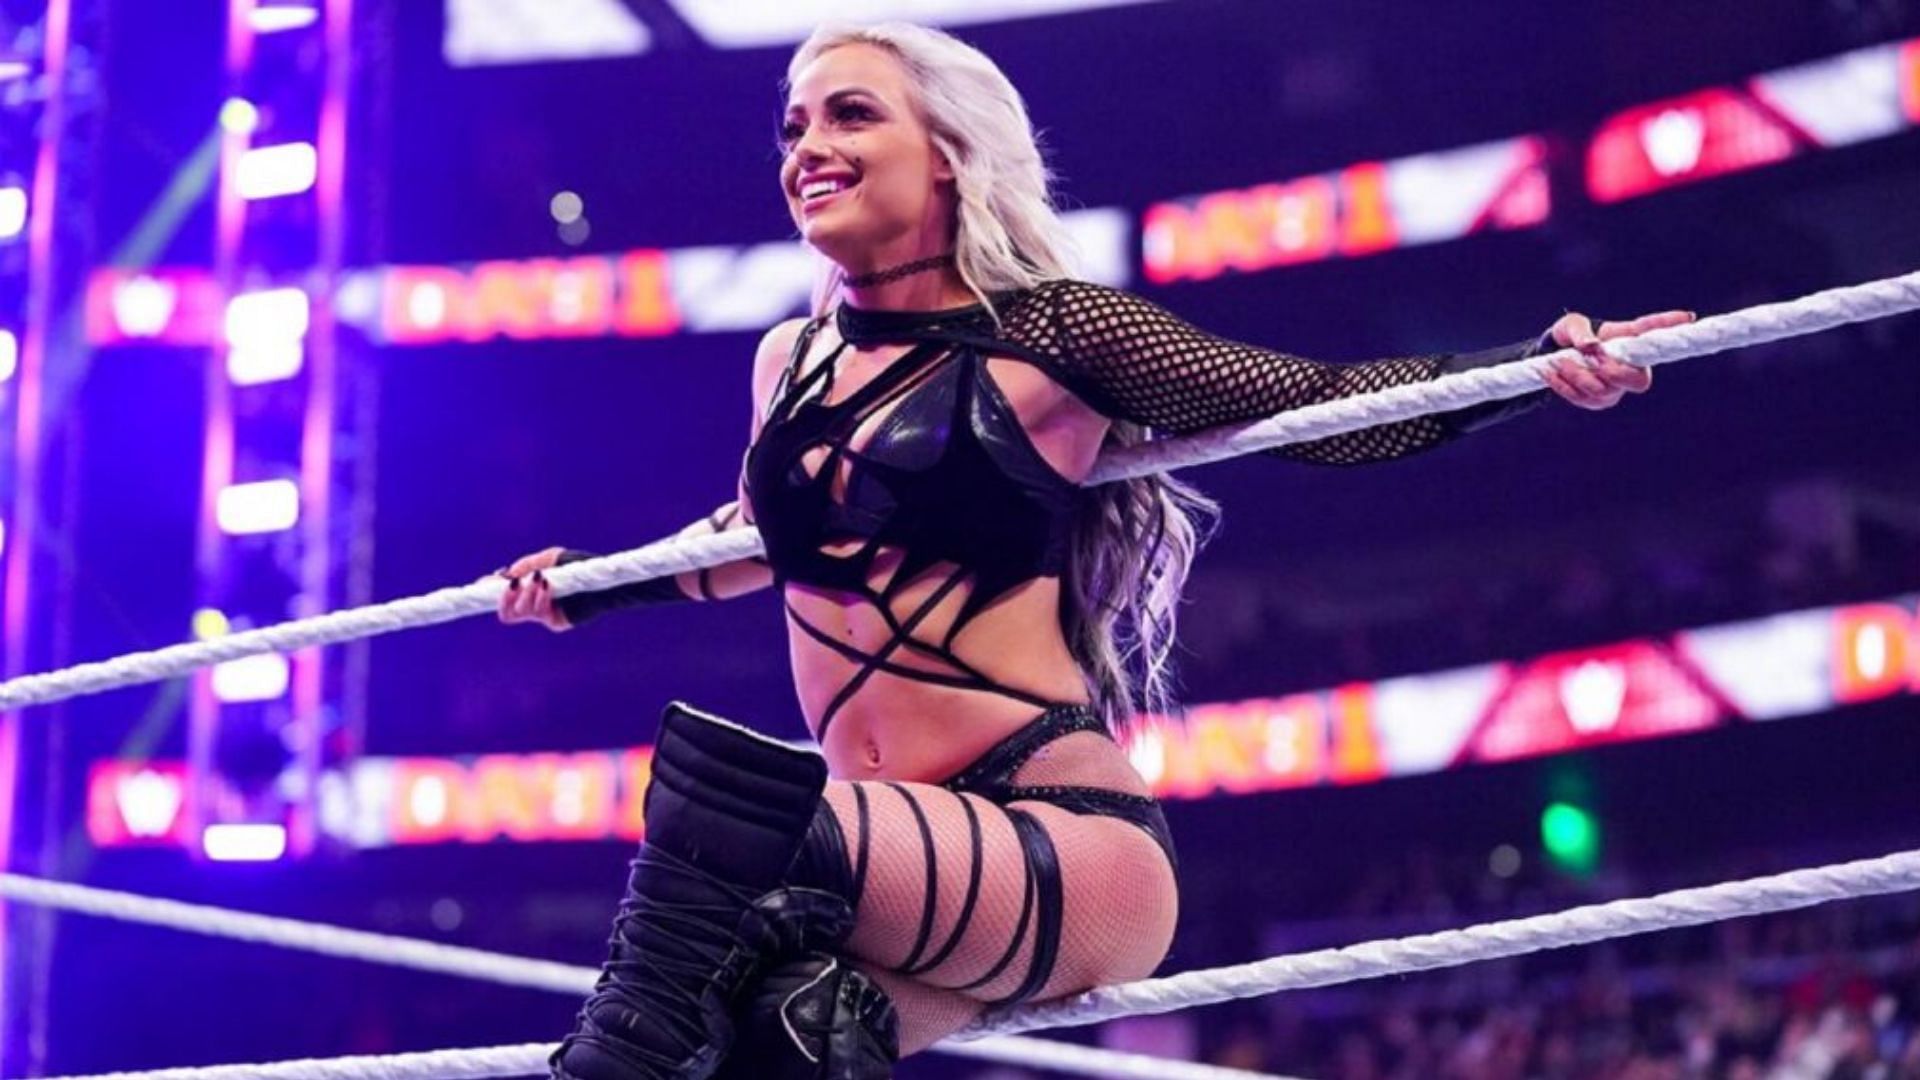 "I'm gonna do it for us" Liv responds to fan ahead of WWE